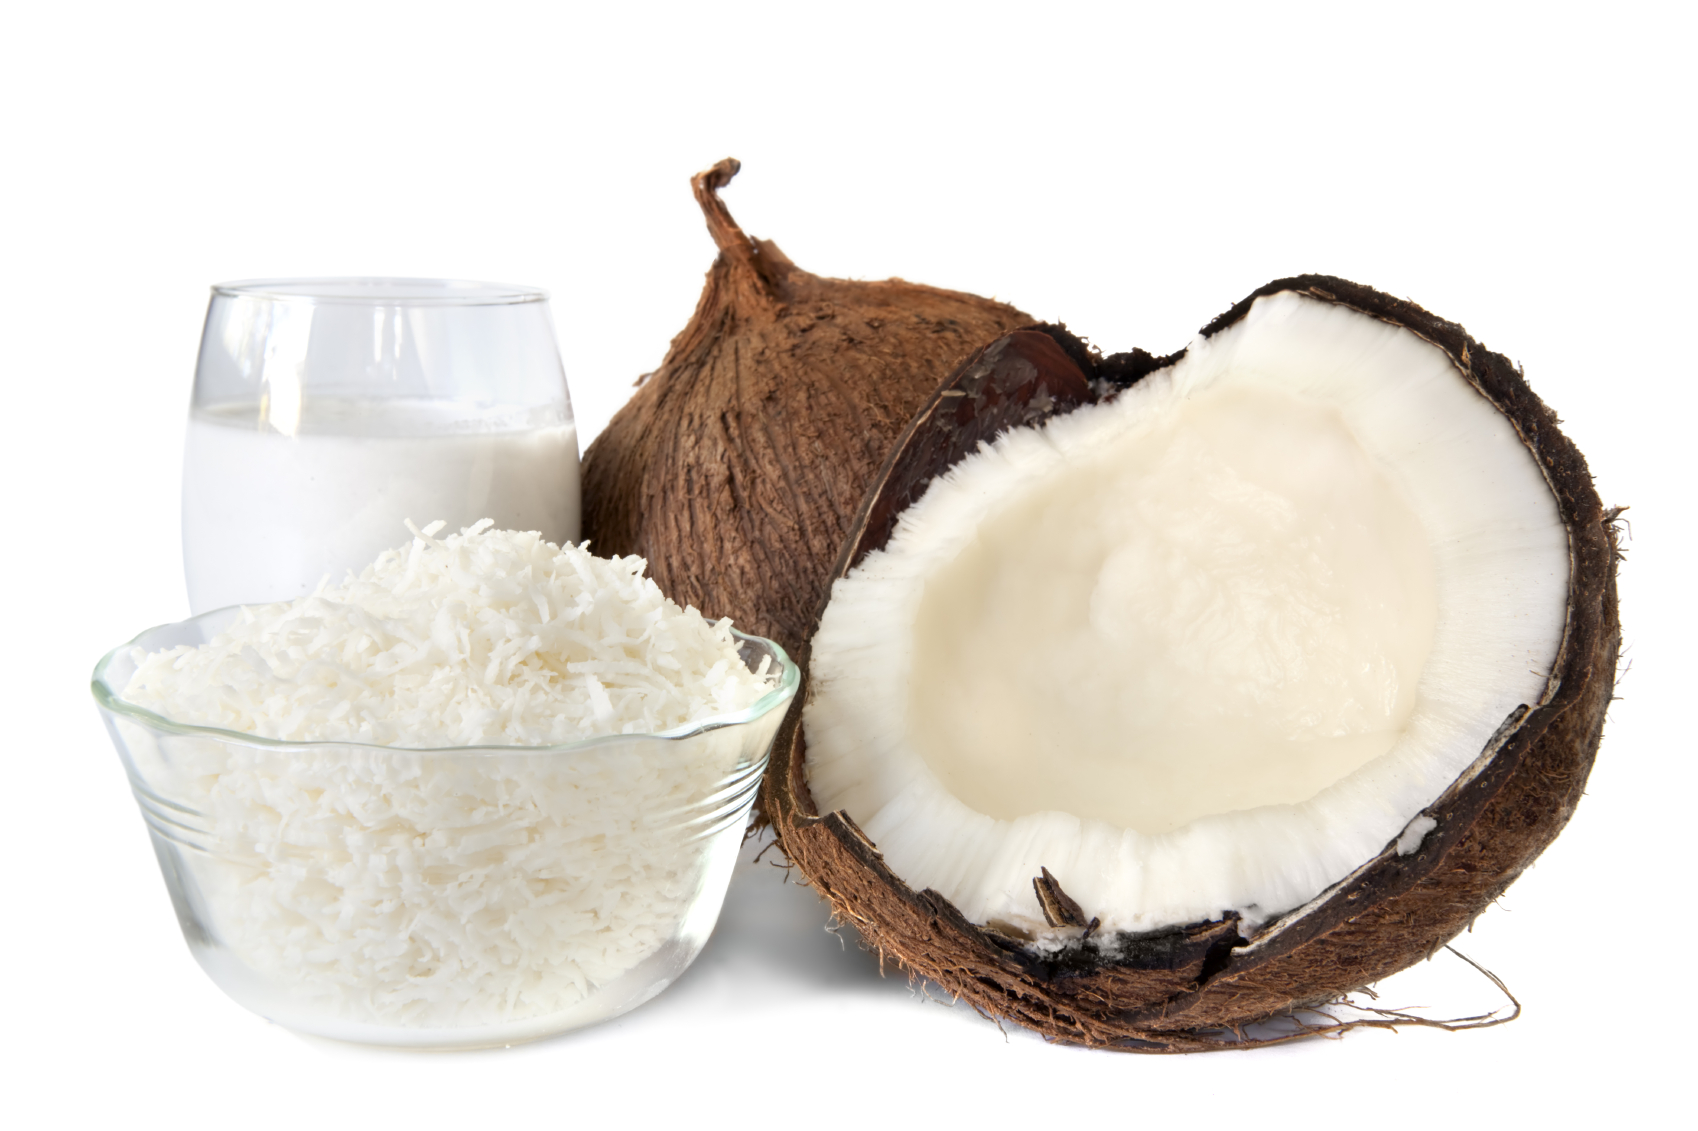 Coconut ProductsManufacturers and ExportersFood & BeveragesAll Indiaother